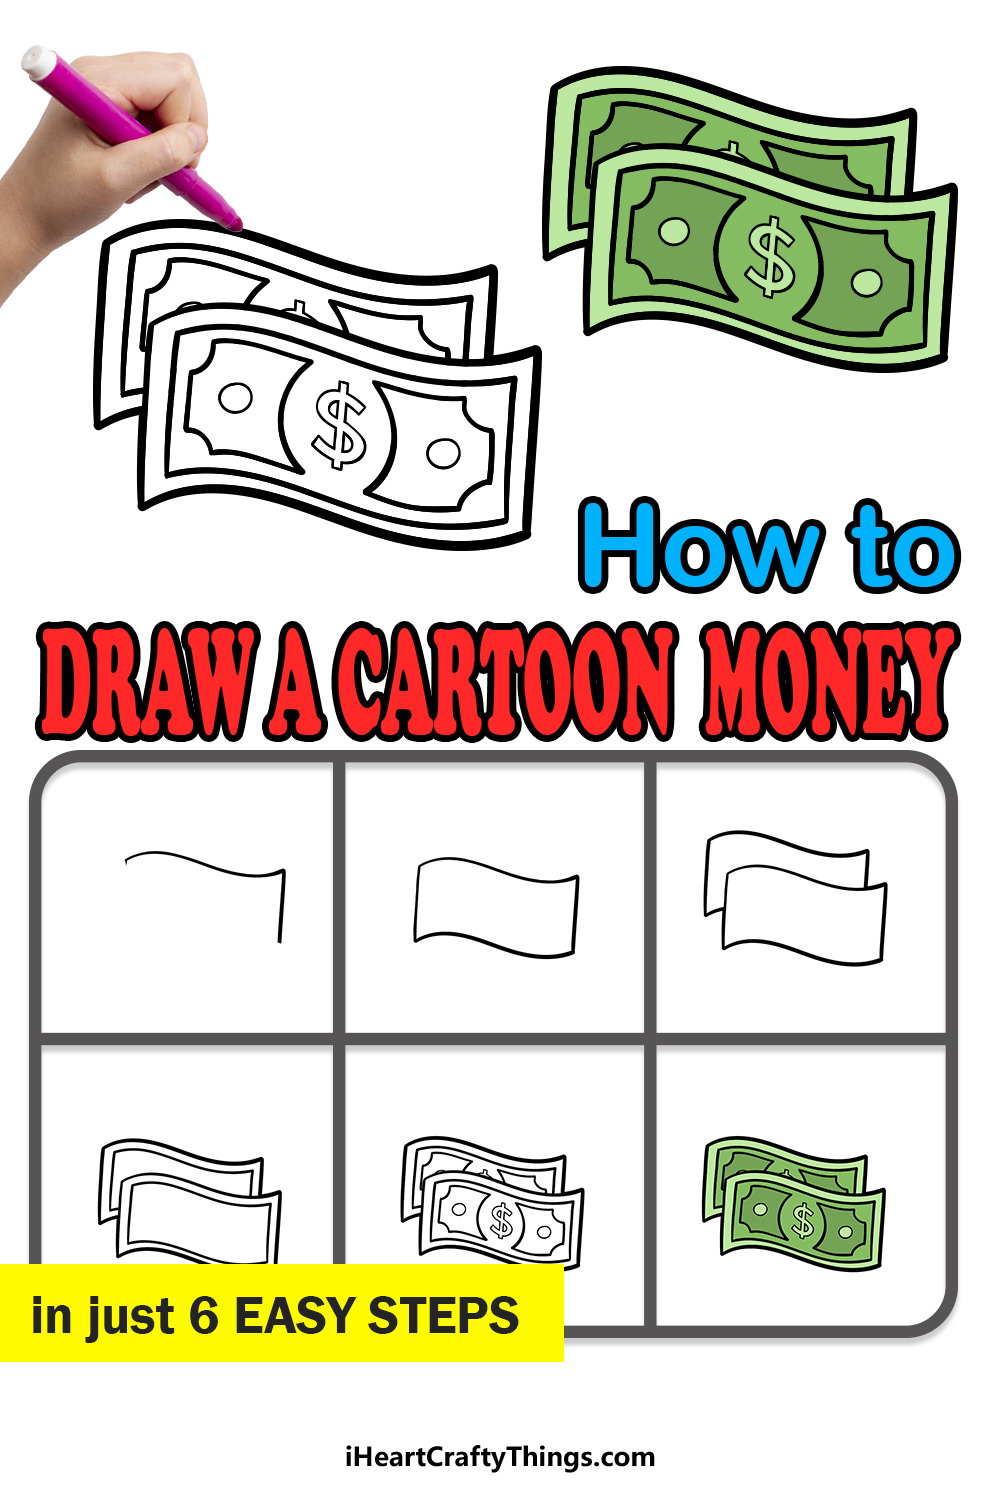 how to draw cartoon money in 6 easy steps